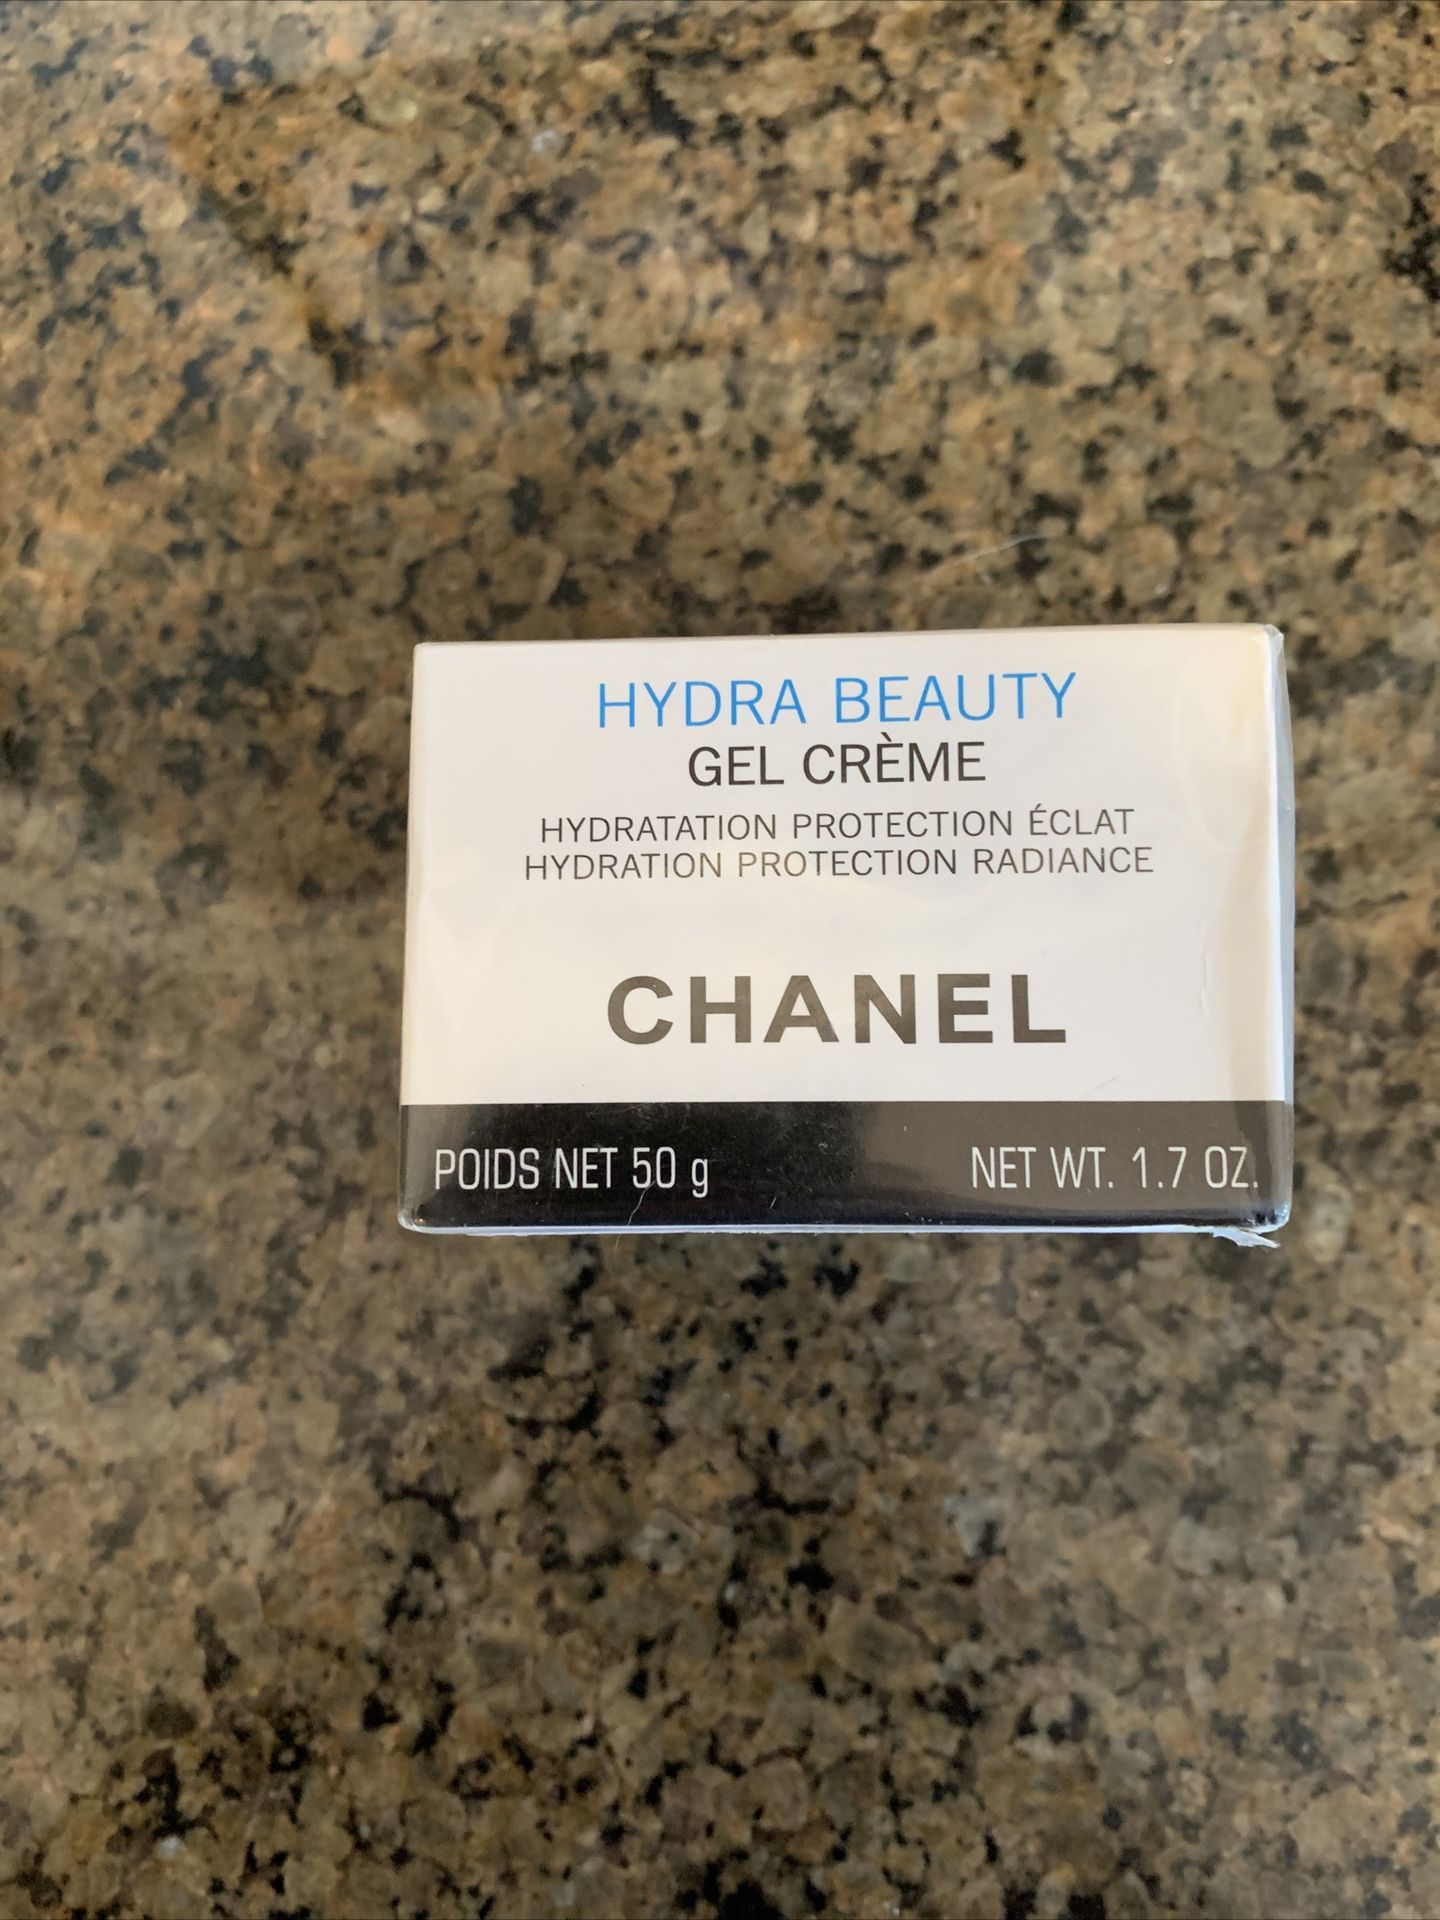 Chanel Hydra Beauty Gel Creme, 1.7oz Ingredients and Reviews